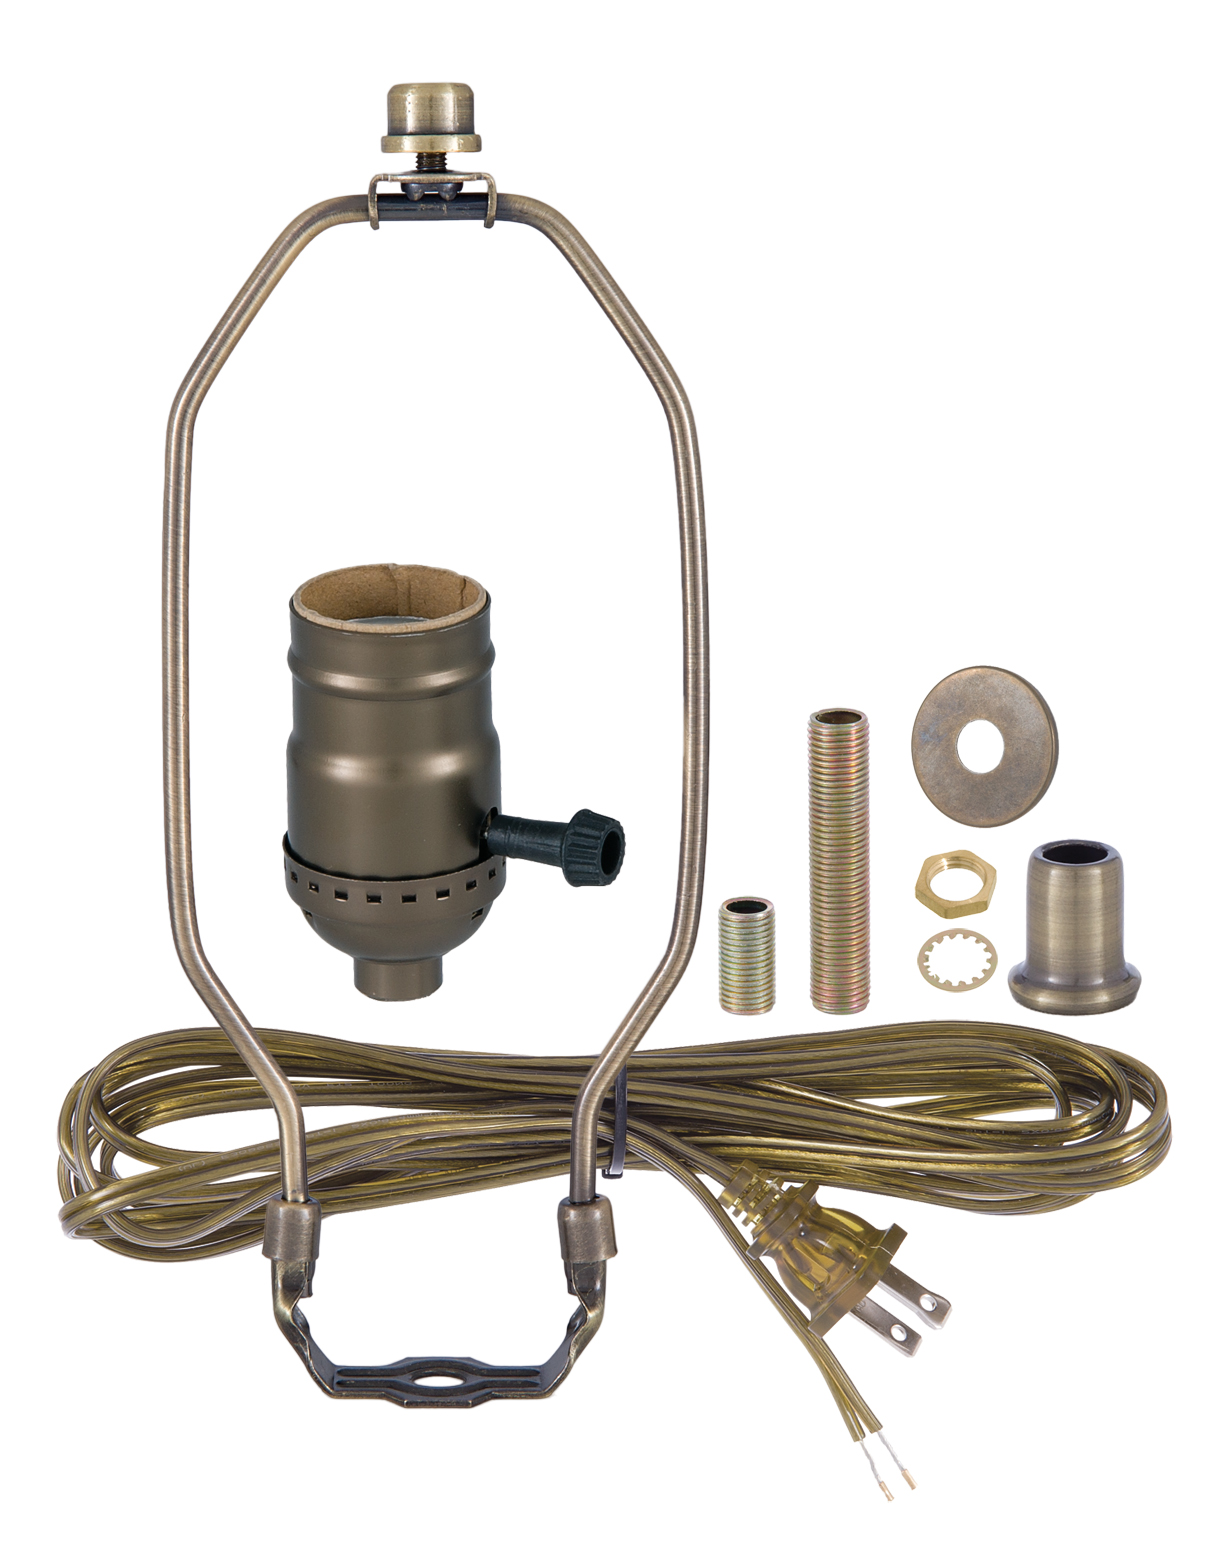 B&P Lamp® Antique Brass Finish Table Lamp Wiring Kit with a 7 Inch Harp and 3-Way Socket - image 2 of 5